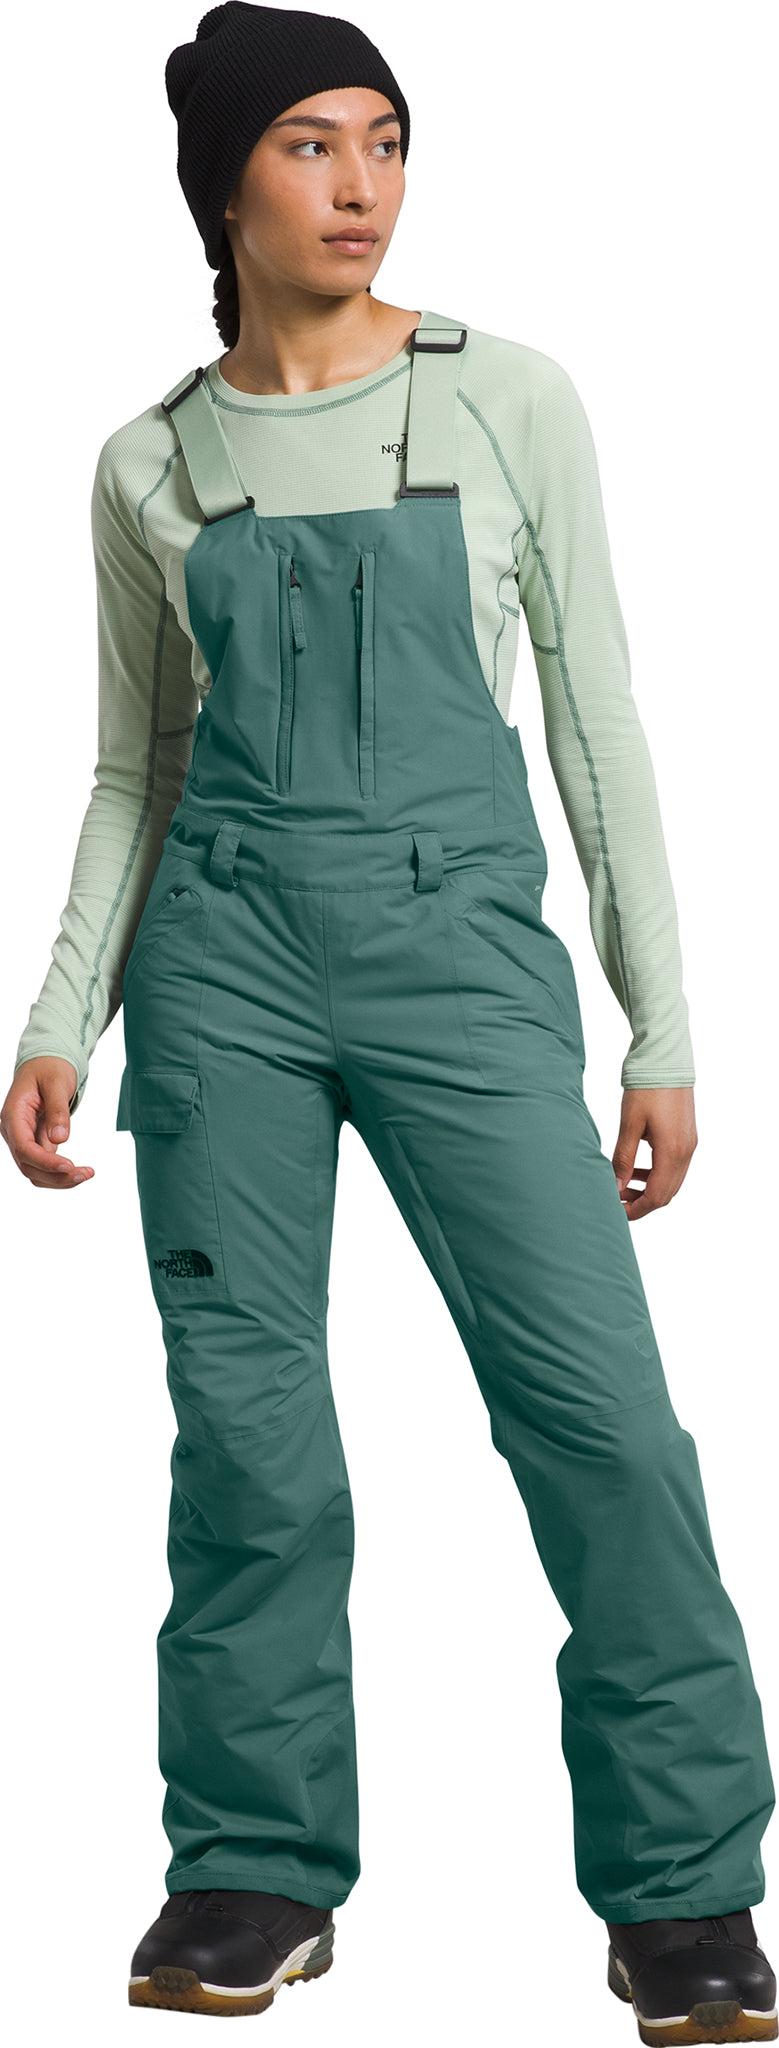 The North Face Sage Green Leggings - The North Face - Purchase on Ventis.